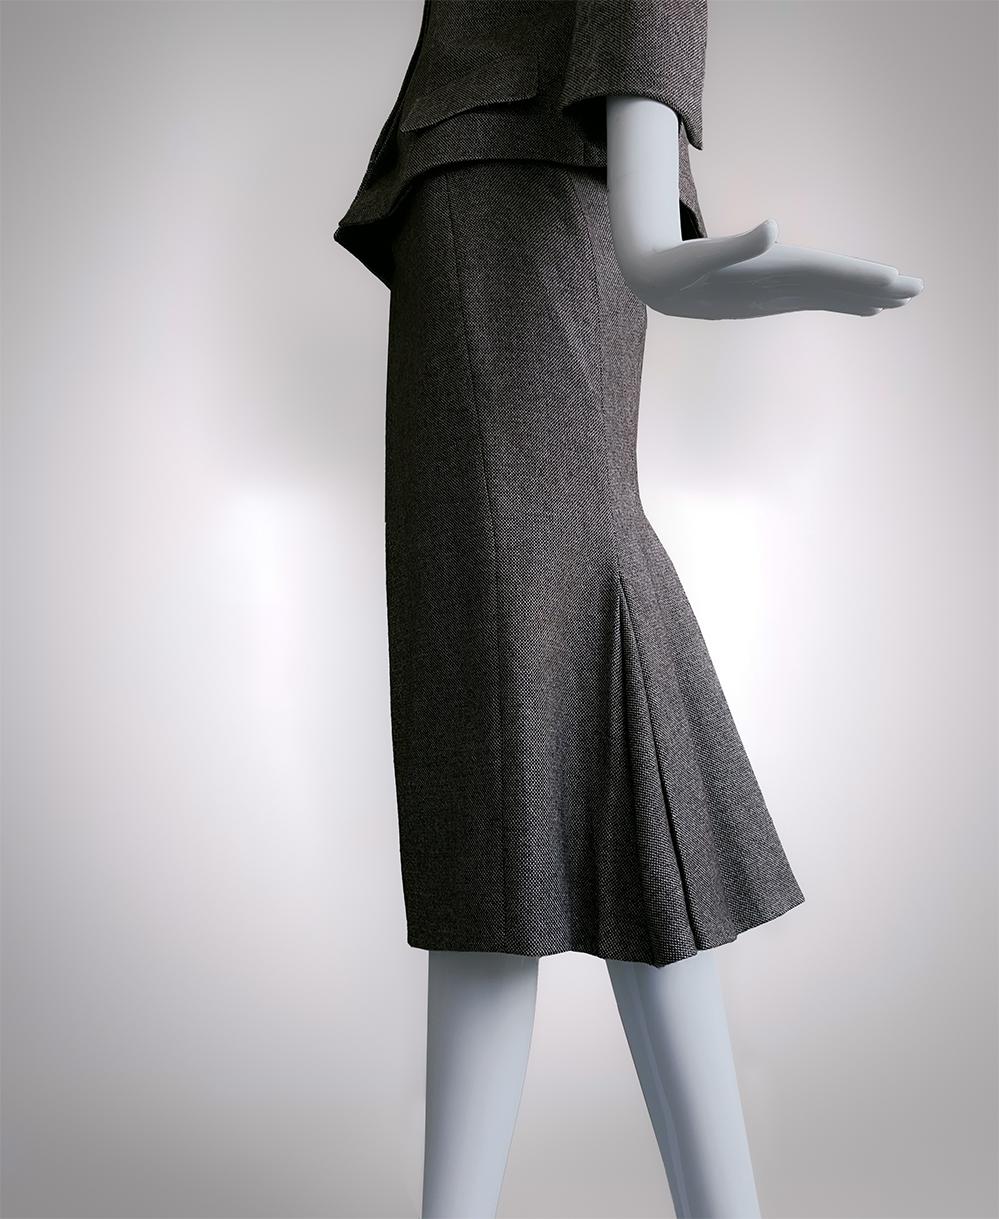 Alexander McQueen Archival FW 2005 'The Man Who Knew Too Much' Wool Skirt Suit For Sale 7